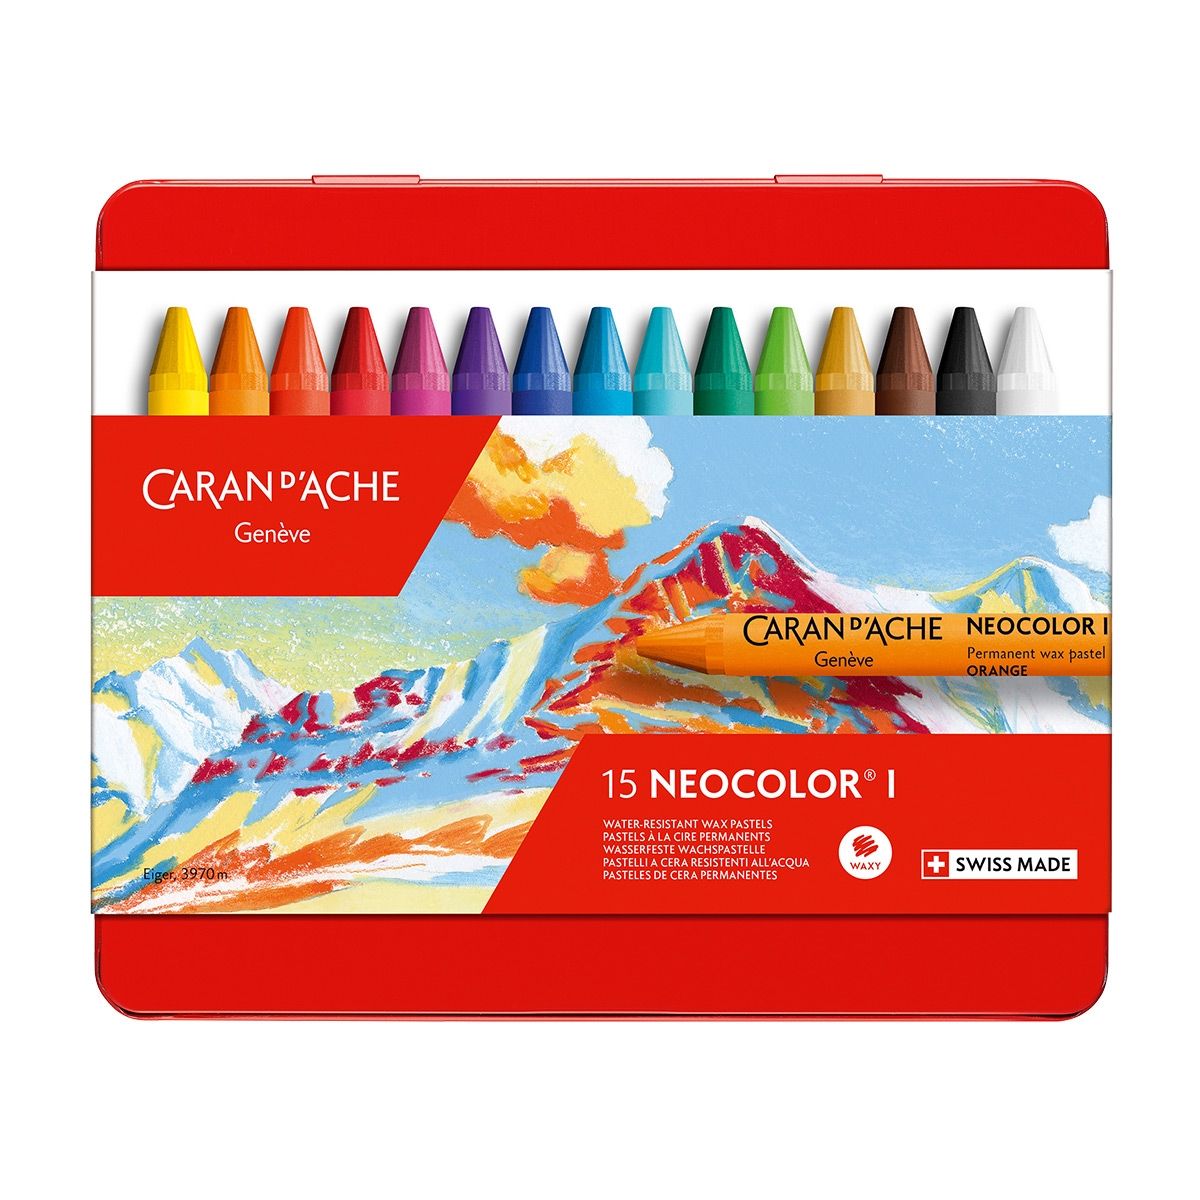 Caran D'Ache Neocolor I Permanent Wax Pastels have exceptional covering power and excellent lightfastness 